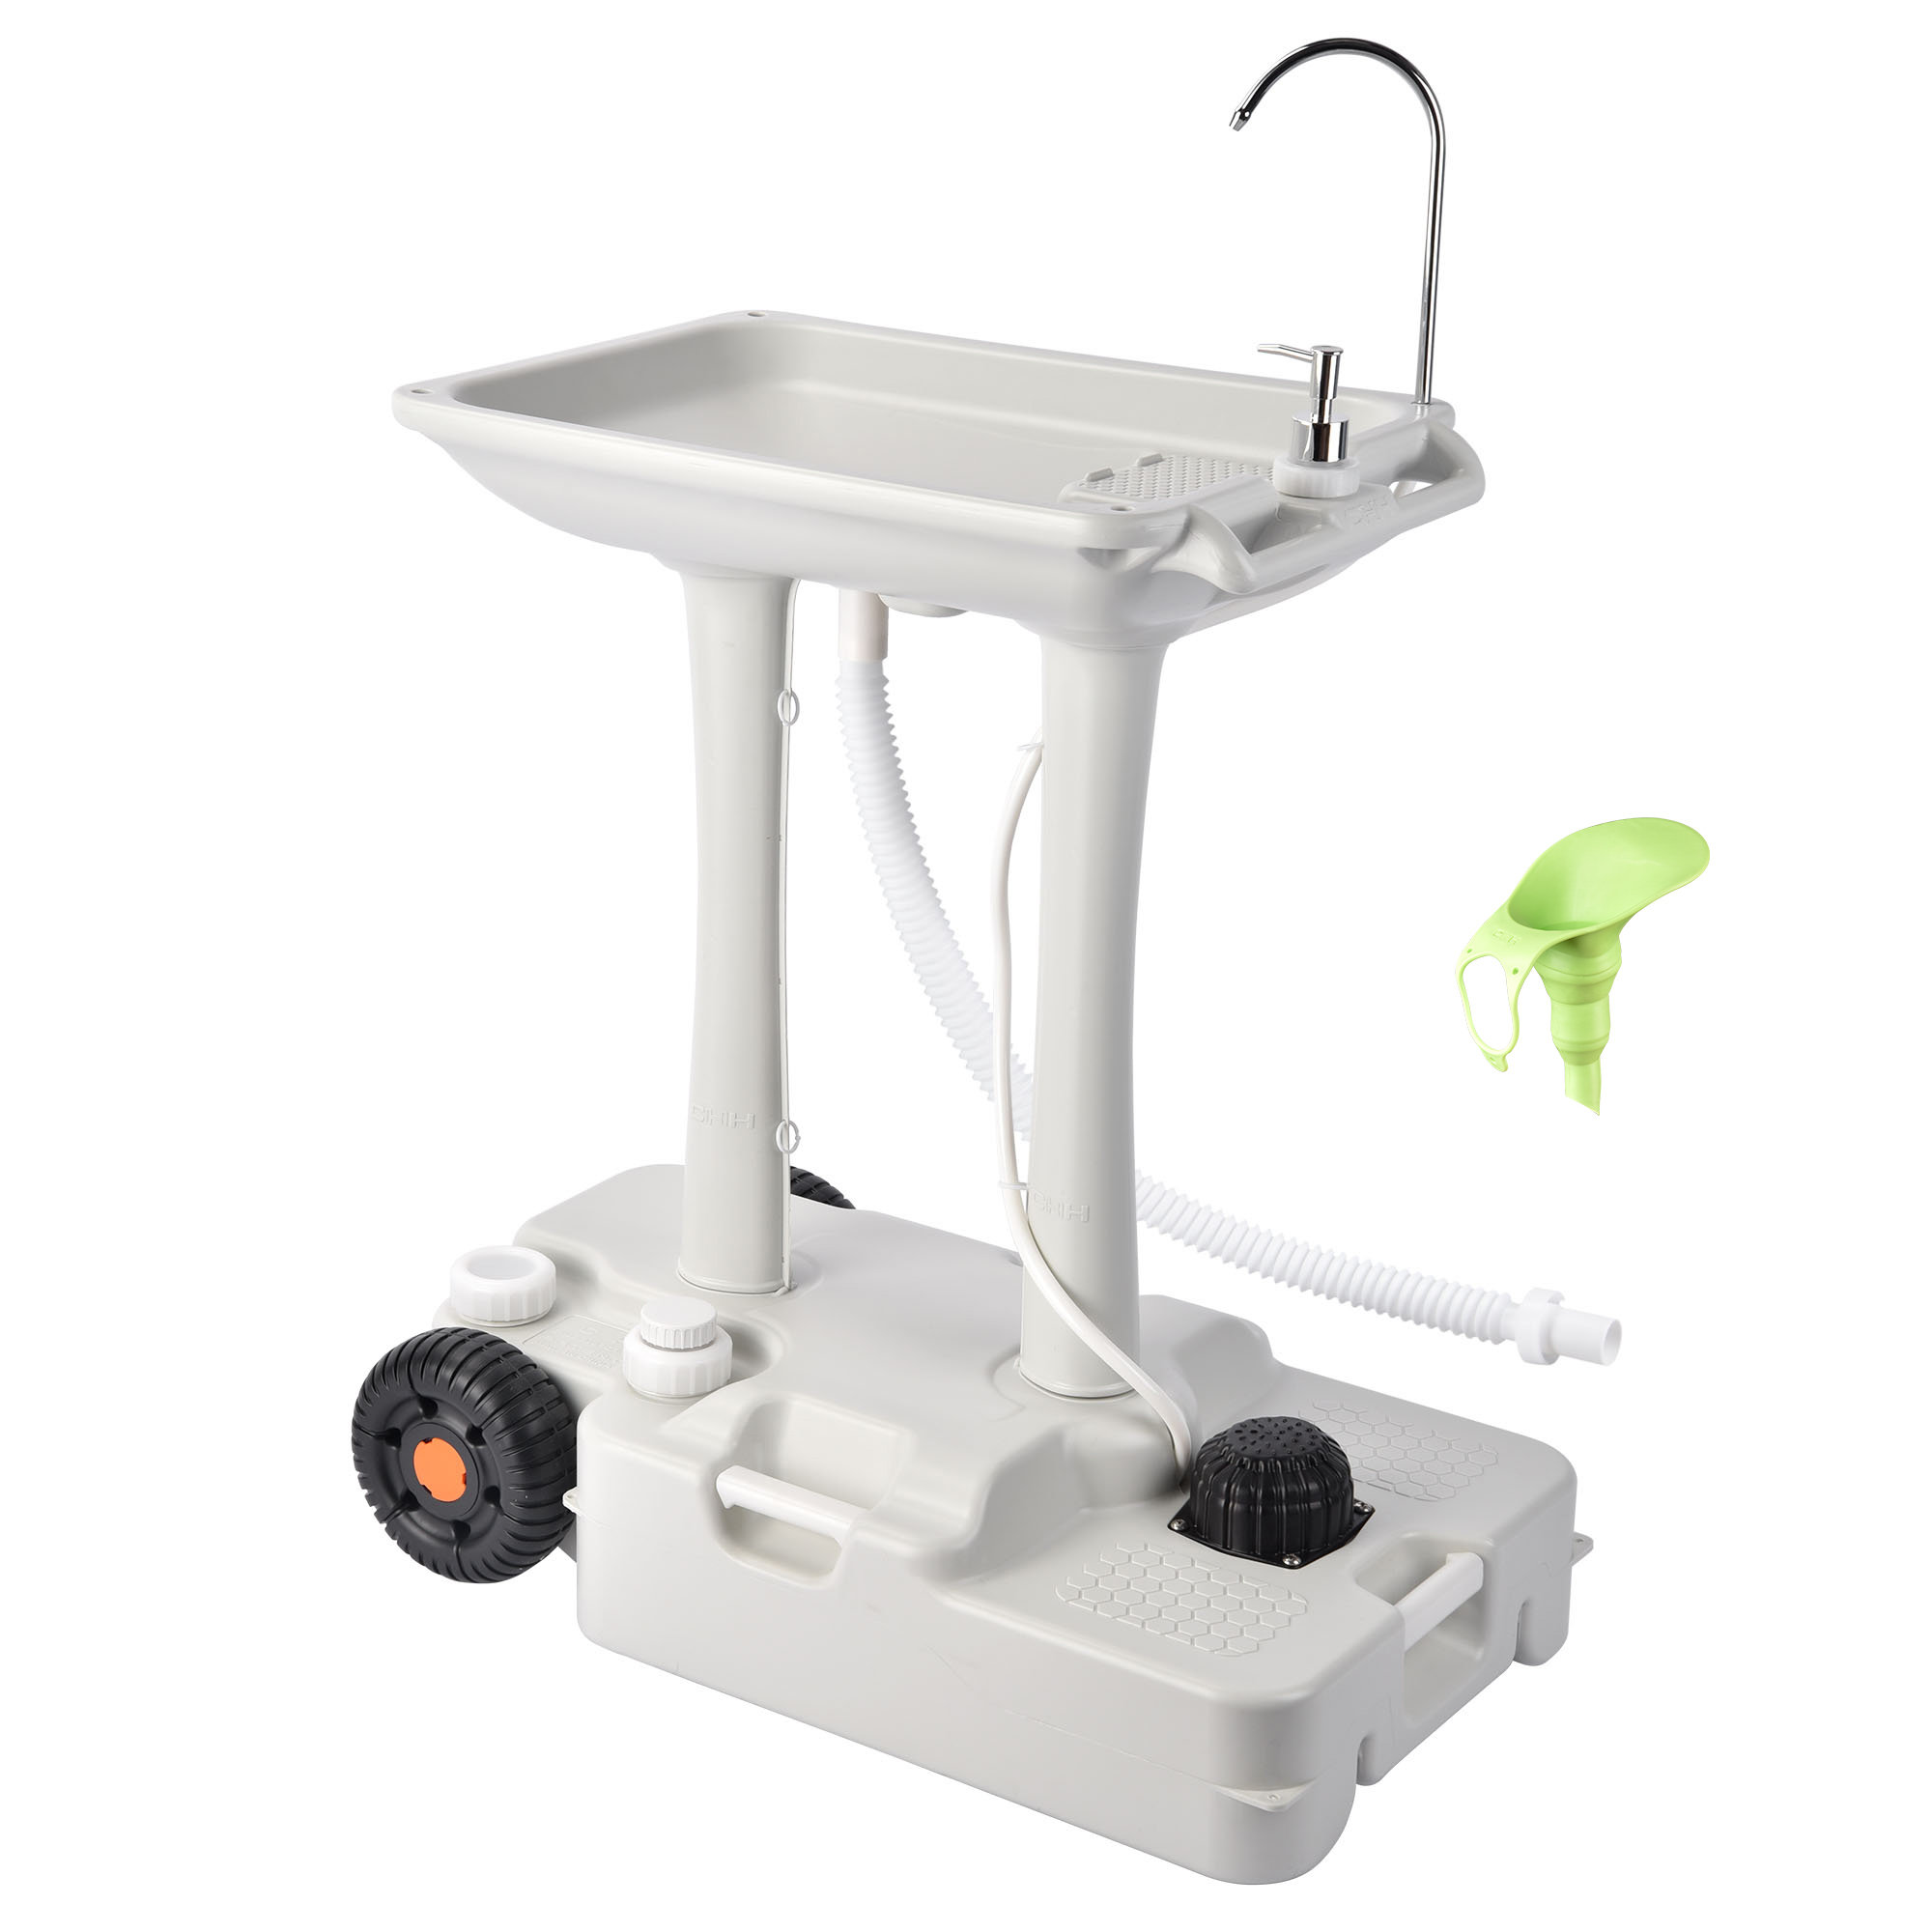 Yescom 17L Portable Camping Sink Hand Wash Stand with Tank Hand Washing Station Outdoor